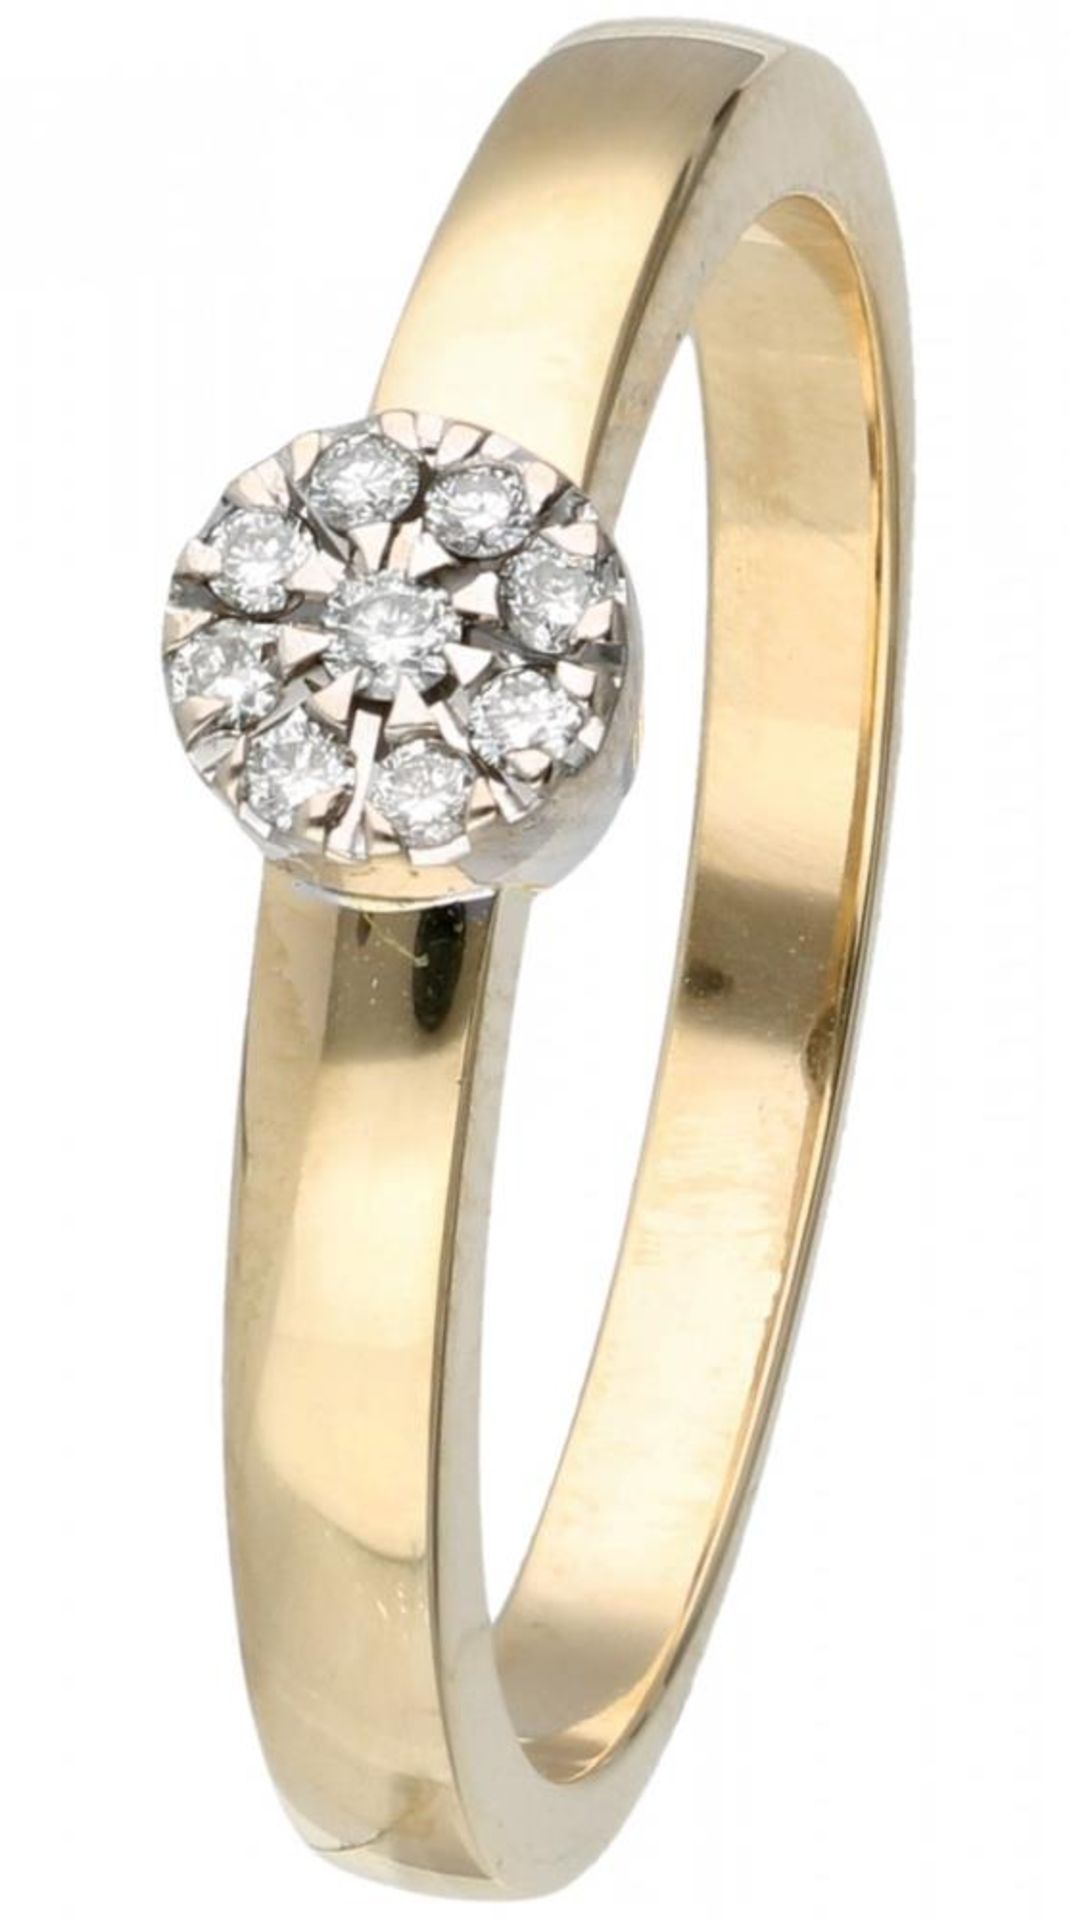 14K. Yellow gold rosette ring set with approx. 0.09 ct. diamond.